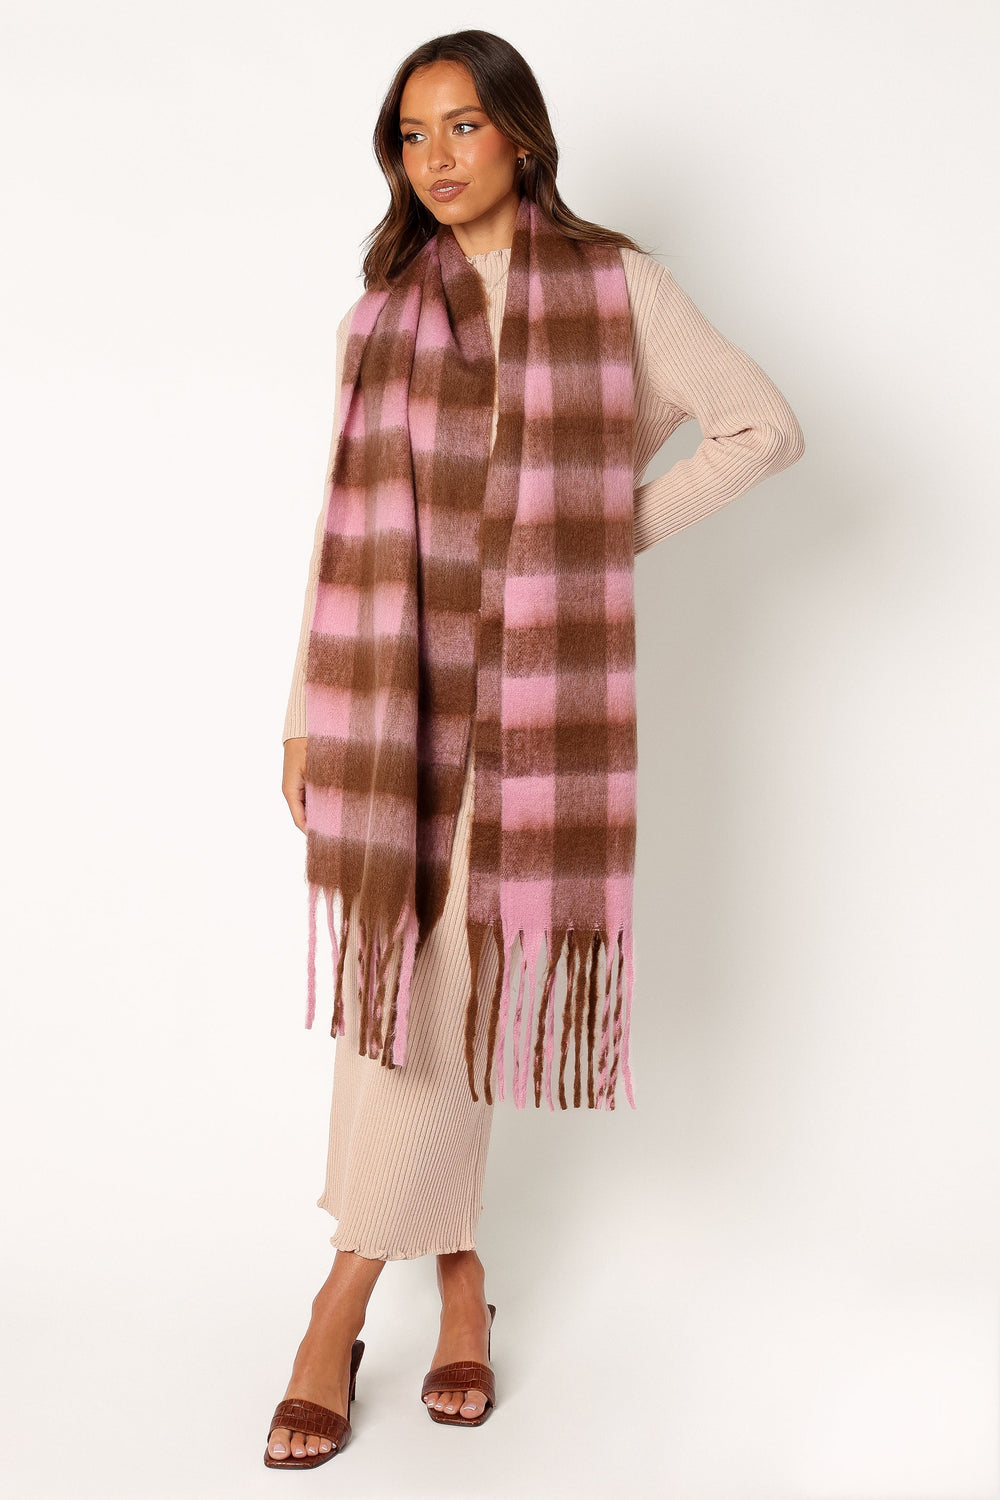 Petal and Pup USA ACCESSORIES Ginnie Scarf - Pink Check One Size